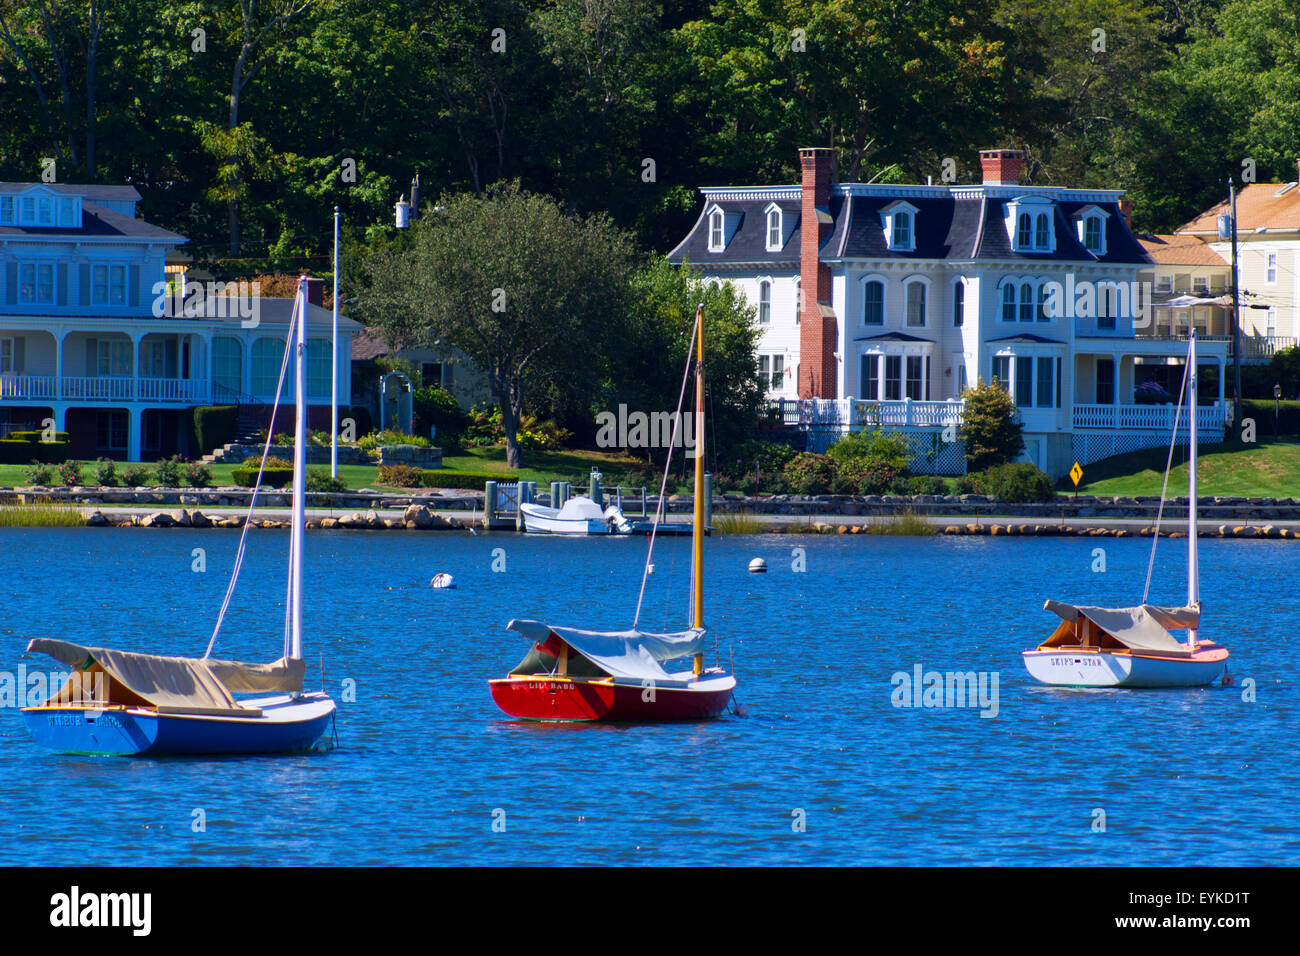 Three small sailboats are moored in front of several beautiful home in this coastal photograph. Stock Photo